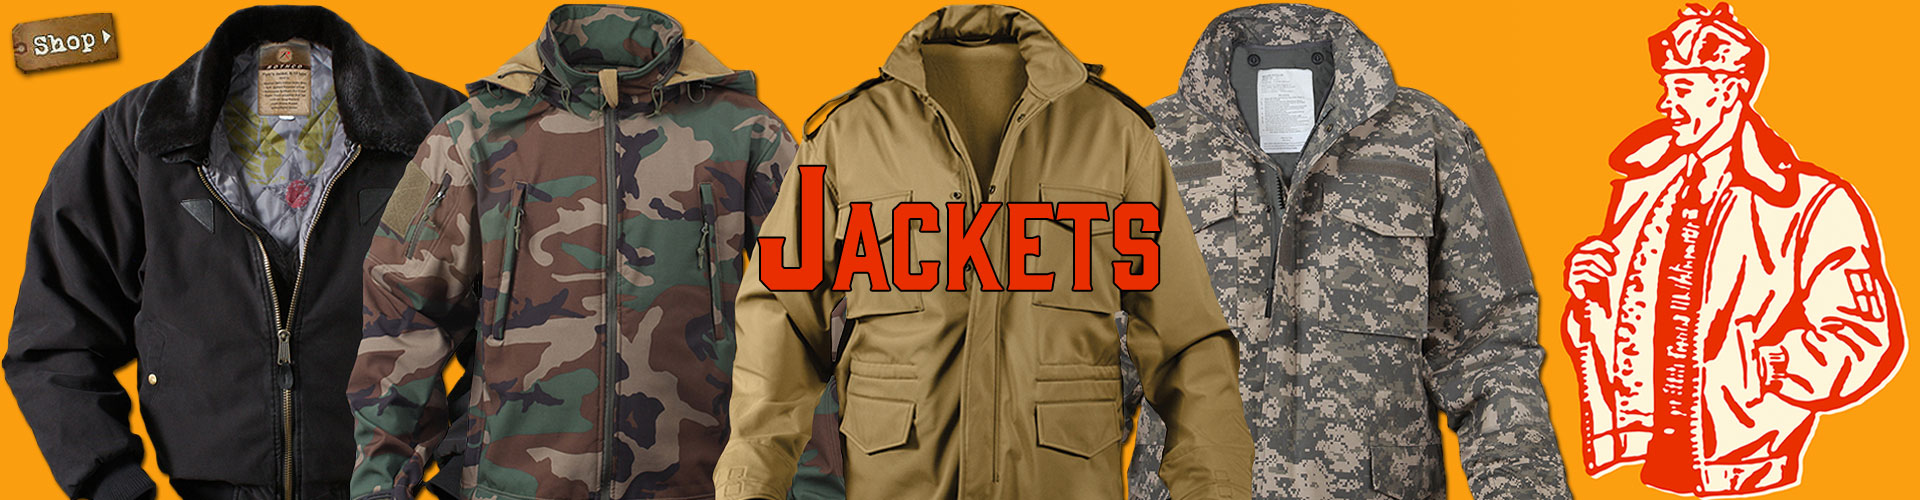 Fatigues Army Navy, Kids Camo, Military Bags, Tactical, Outdoor Clothing,  Survival Gear